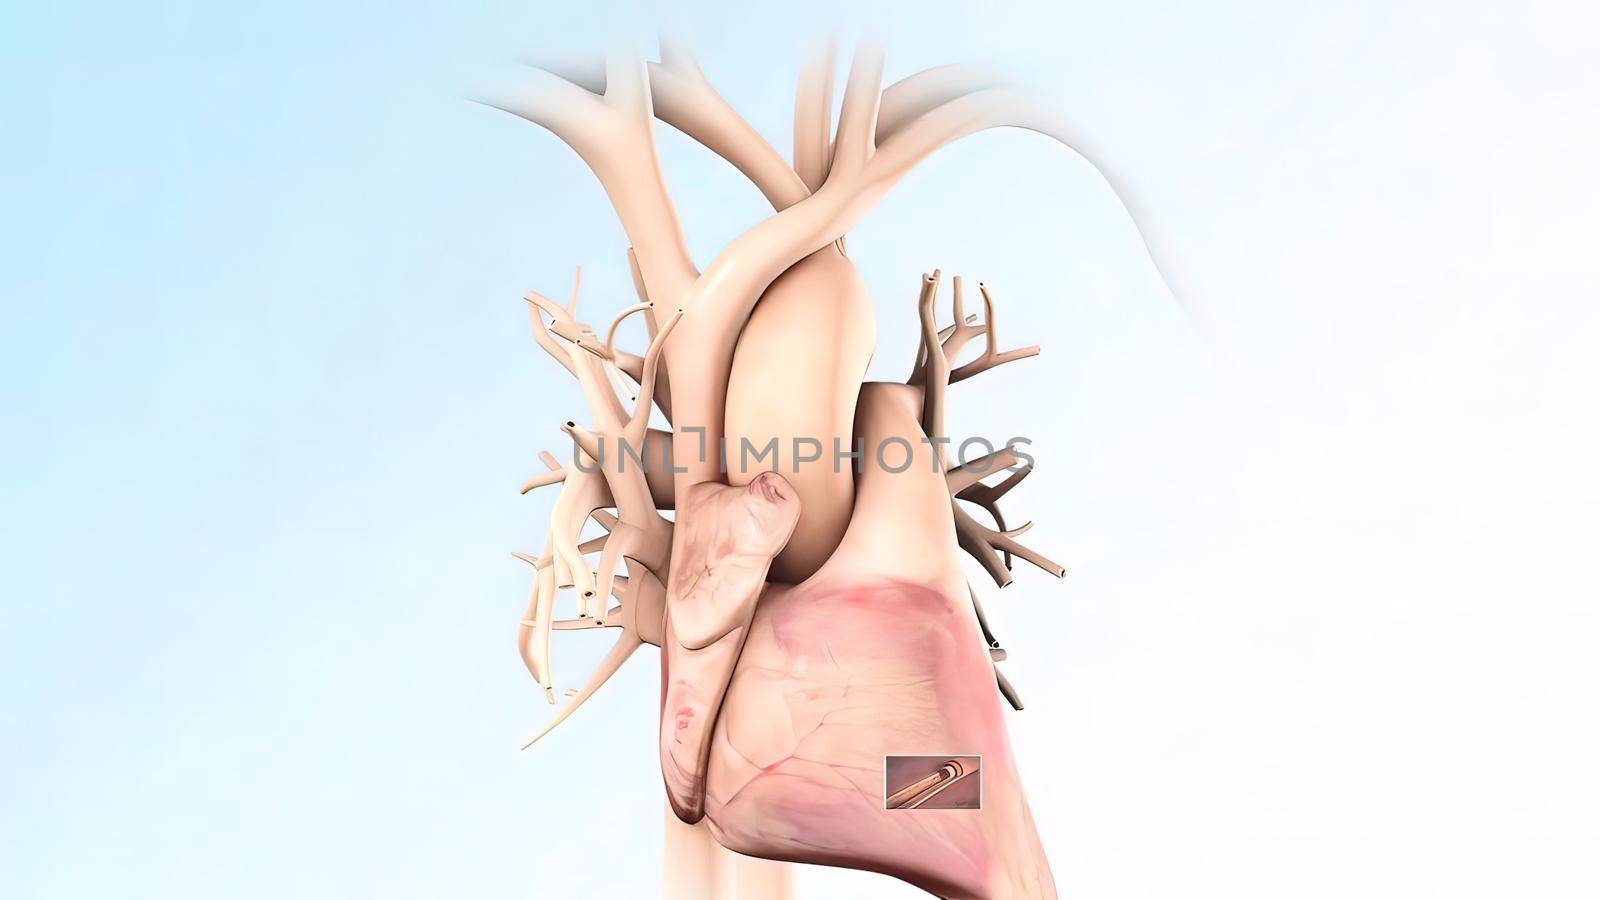 anatomical human heart illustration by creativepic